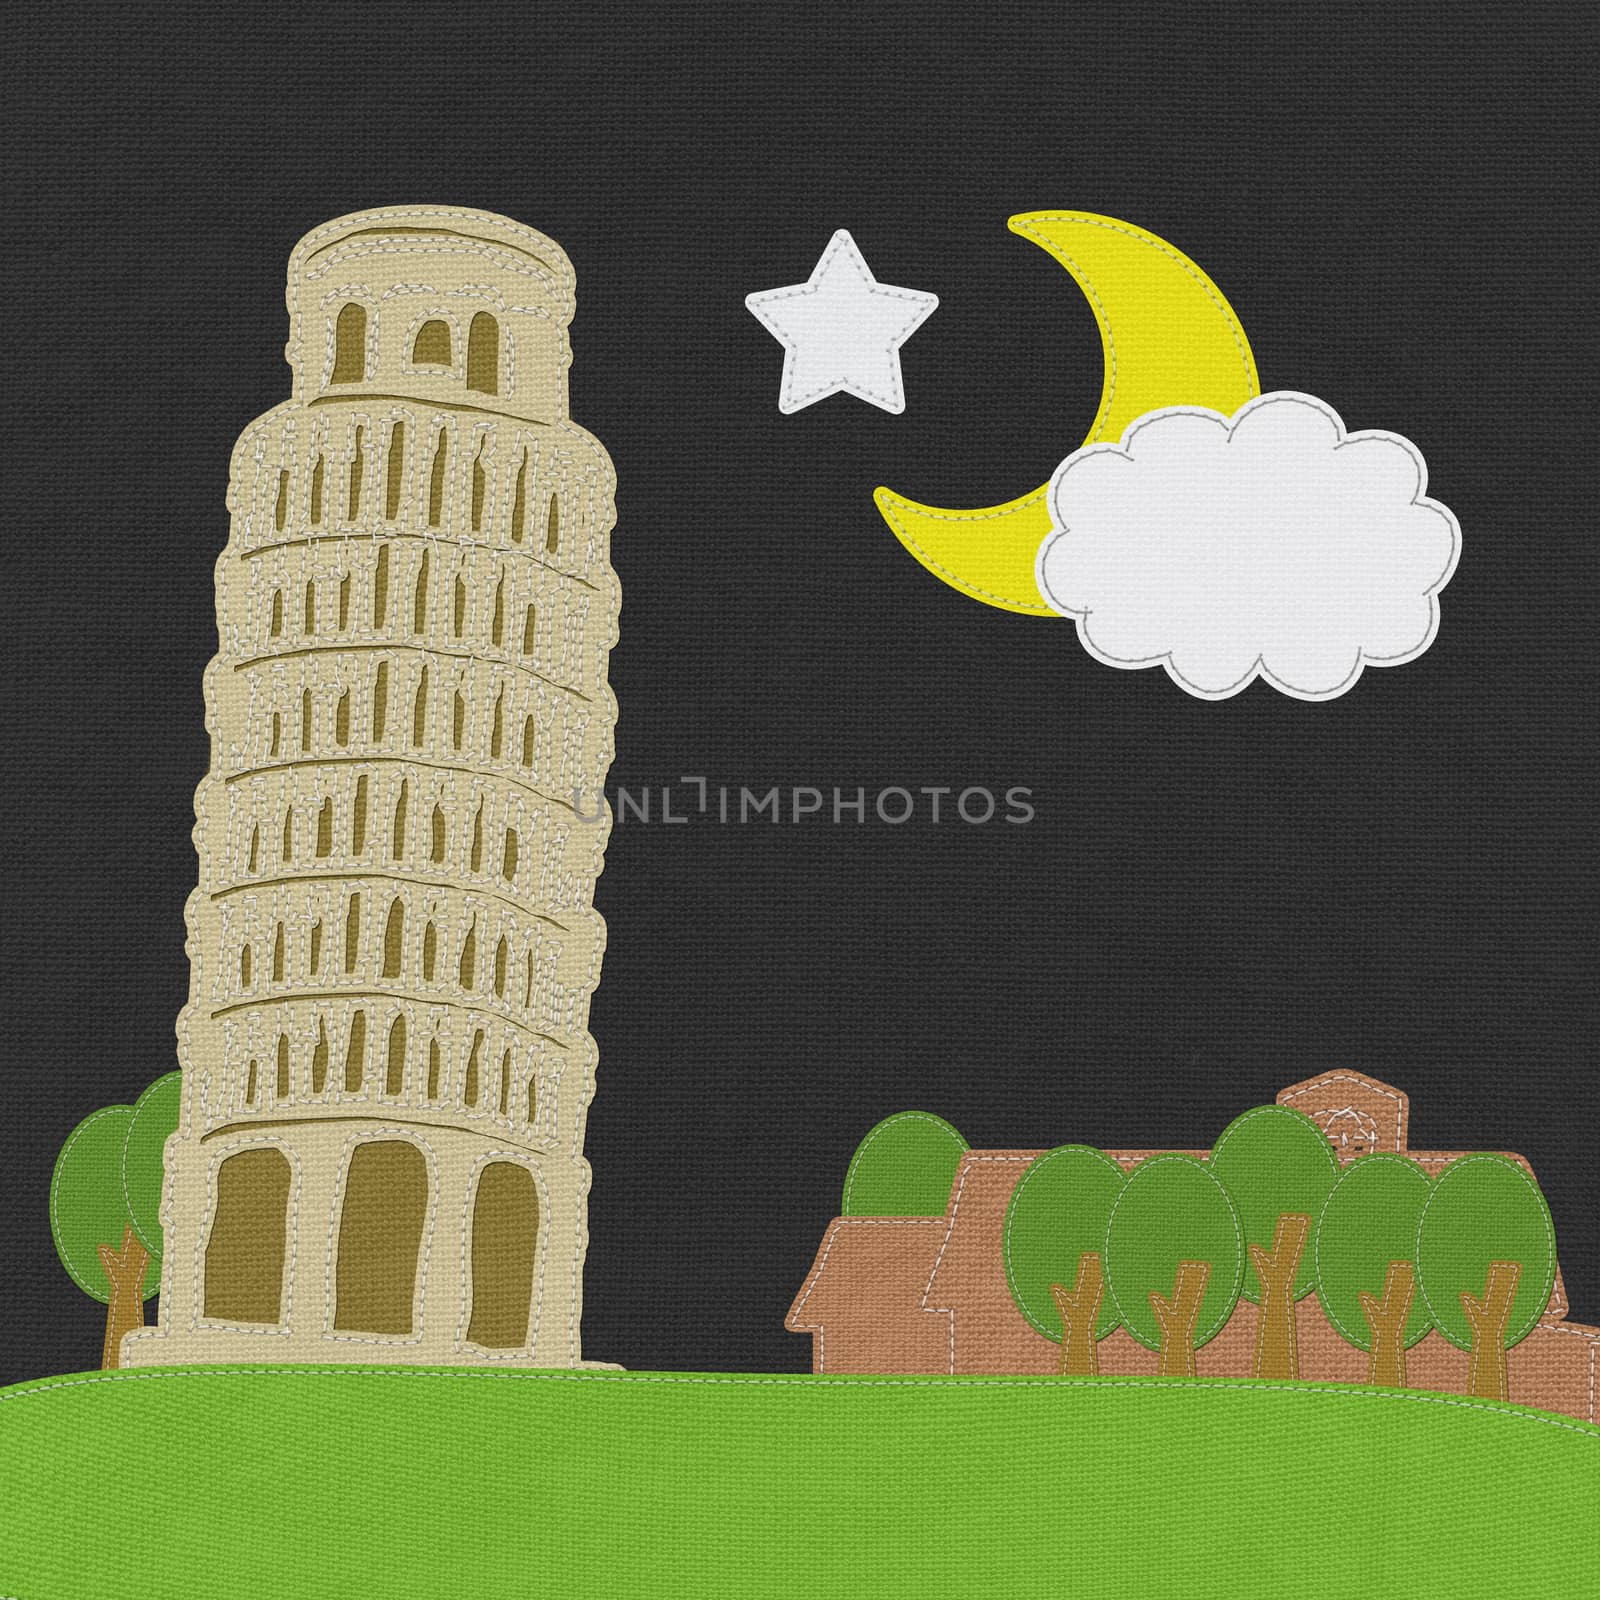 Pisa tower in stitch style on fabric background by basketman23